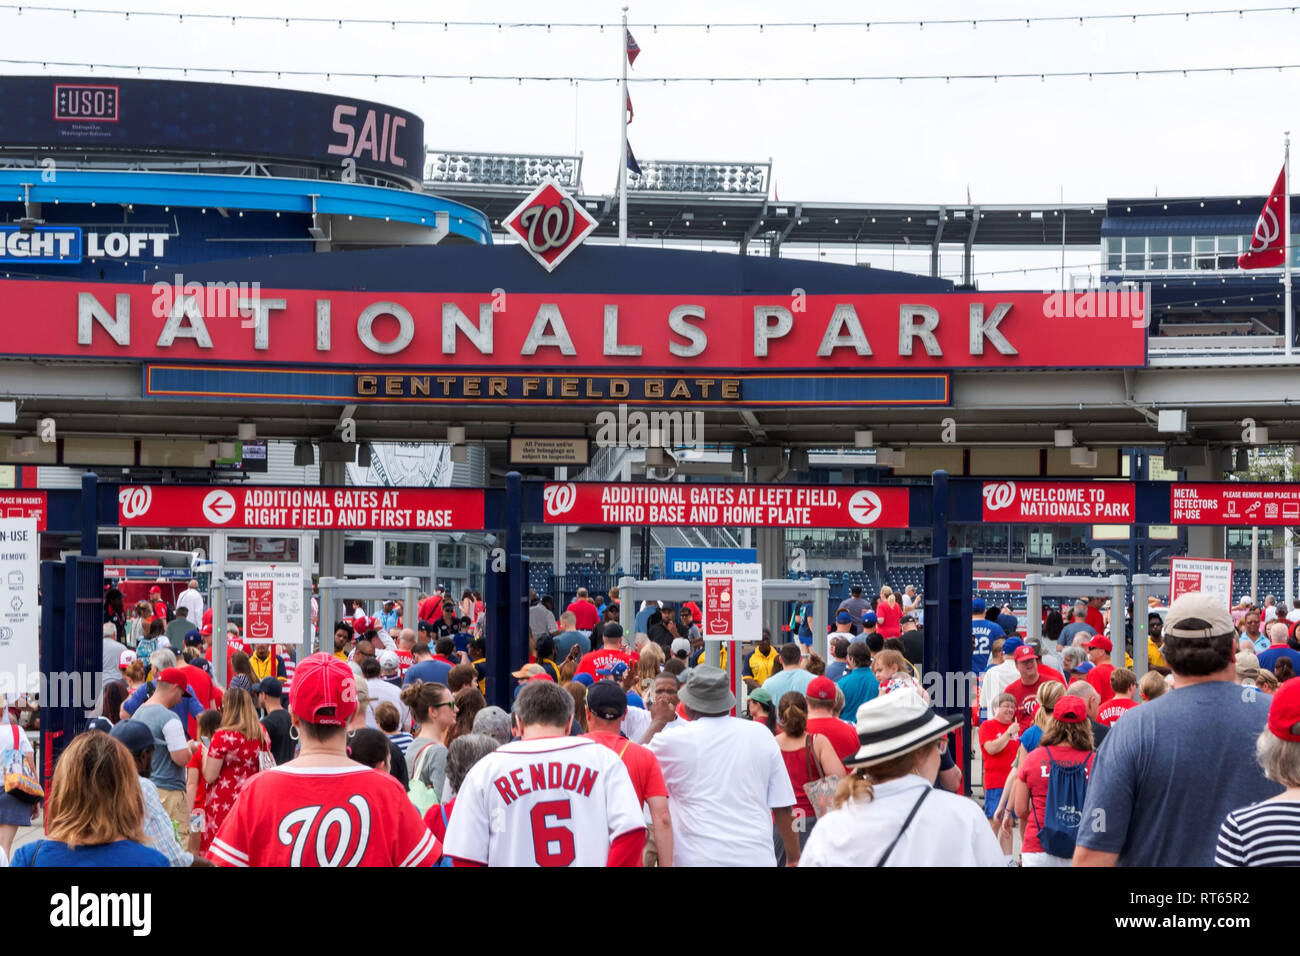 Washington D.C, USA - 4 July 2017: The fans walking into an early morning baseball game between the Nationals and the Mets on the fourth of July 2017. Stock Photo